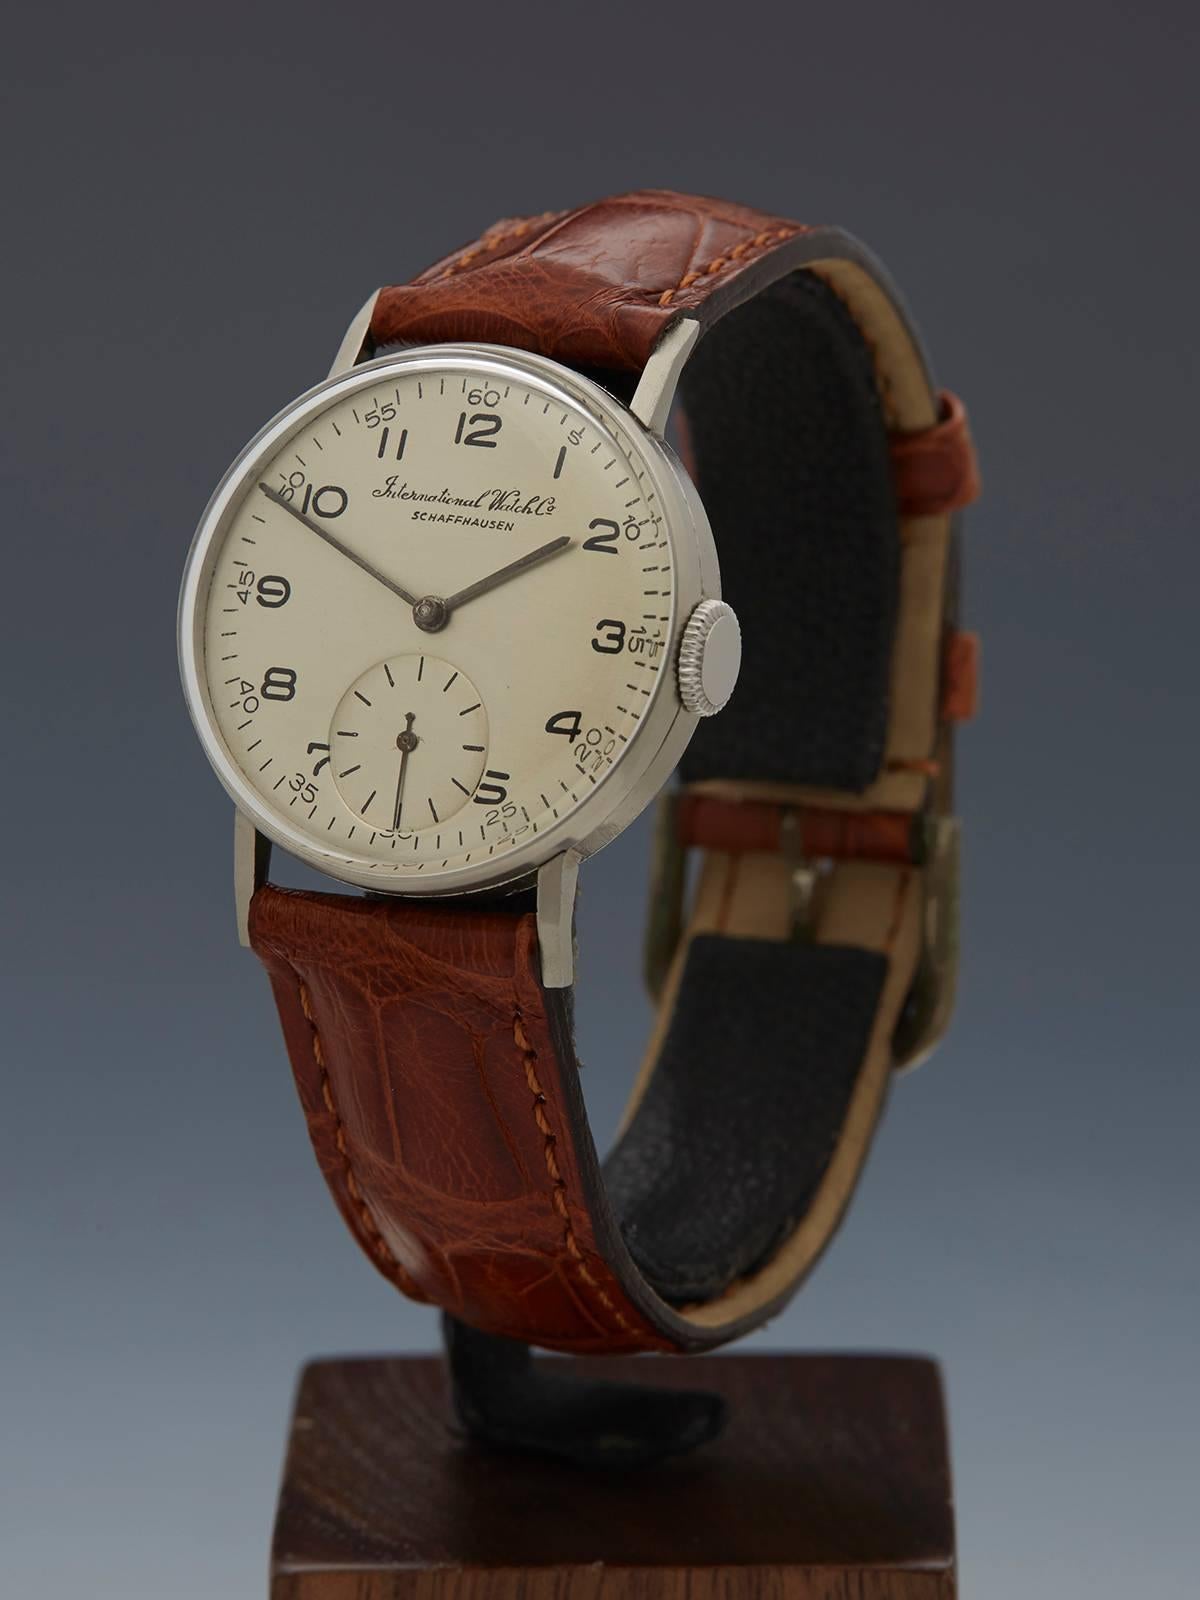 Specifications

Movement: Mechanical Wind 
Case: Stainless Steel
Case Diameter: 30mm 
Dial: Silvered
Bracelet: Brown Leather
Strap Length: Adjustable up to 20cm
Strap Width: At Case - 16mm/At Buckle - 14mm 
Buckle: Tang
Glass: Plexiglass